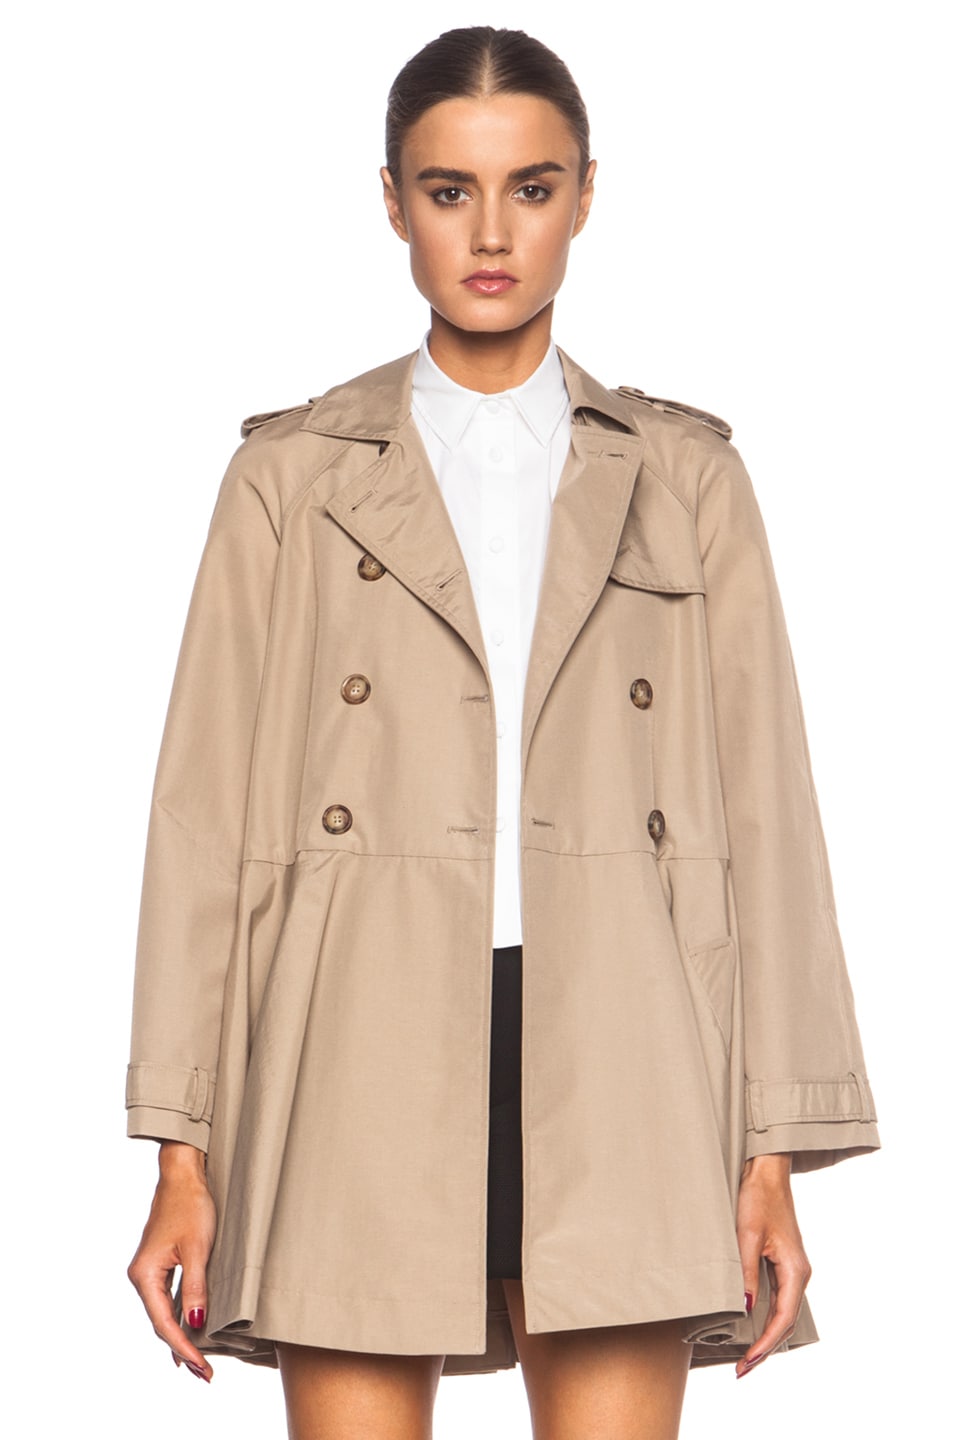 Red Valentino Canvas Polyamide Trench Coat in Dune | FWRD